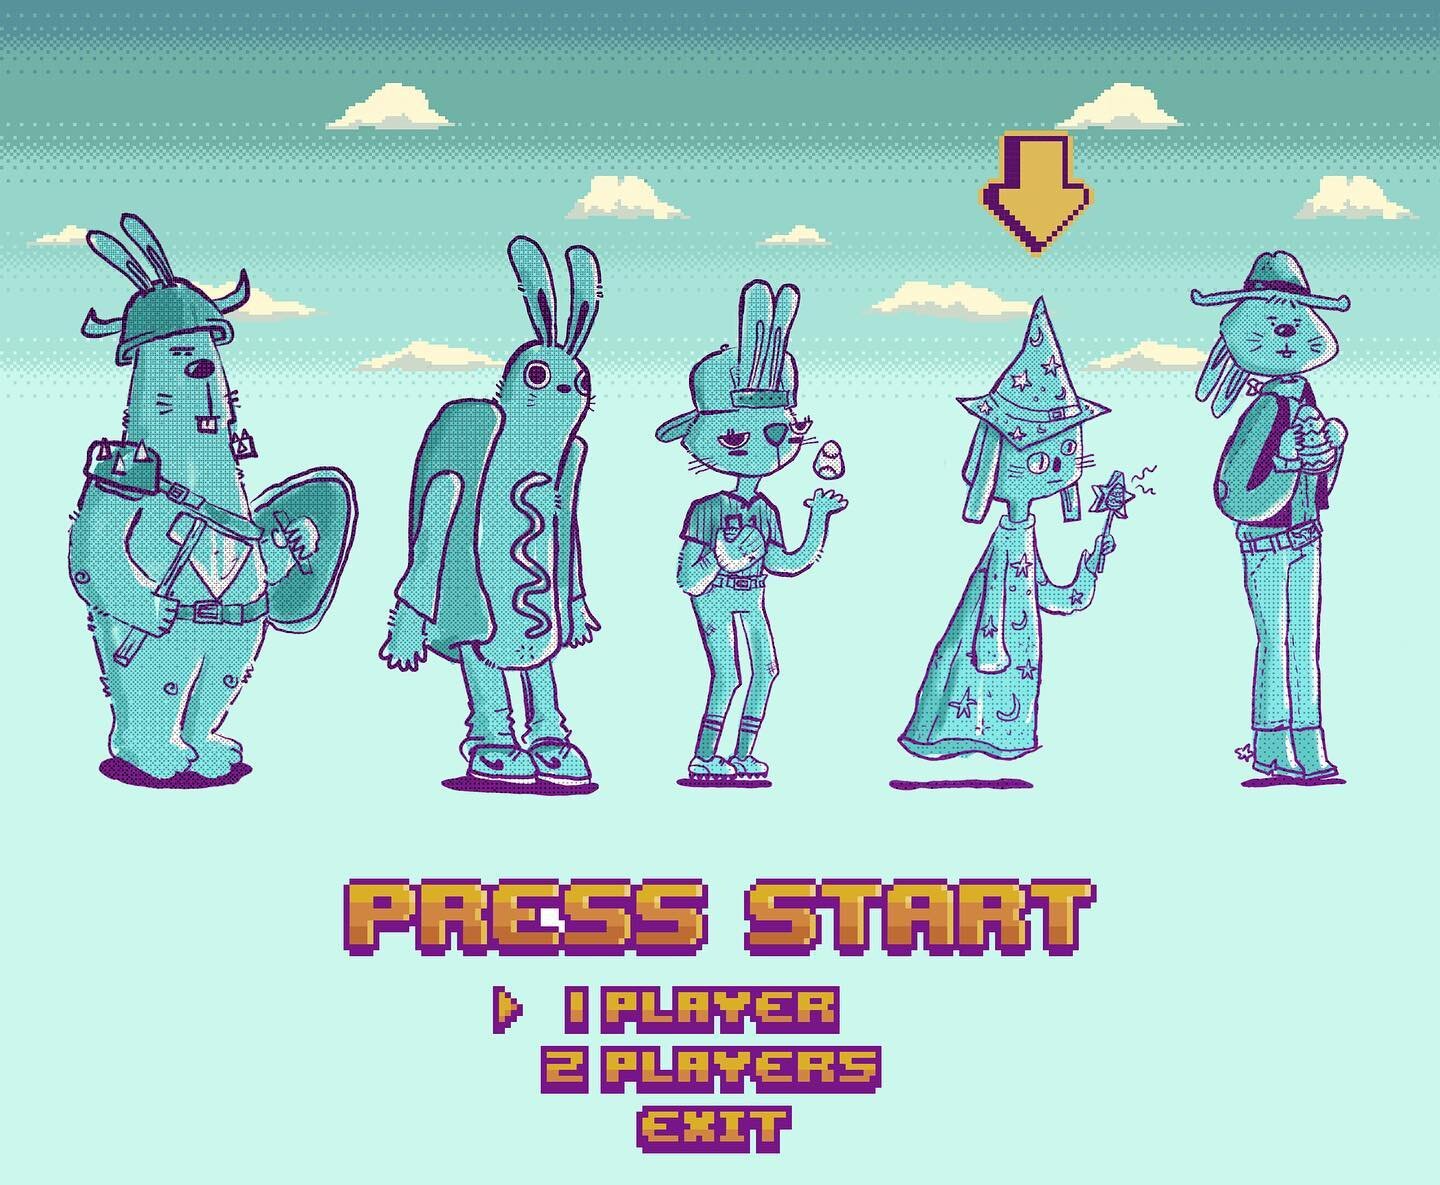 Choose your avatar, Easter bunny edition. I personally think hot dog bun-ny has the best combos 👾🕹️🐰 (I&rsquo;m a small illustrator trying to grow my base, please reshare :) #illustration #videogameart #easterbunny #easterart #illustrator #adobe #